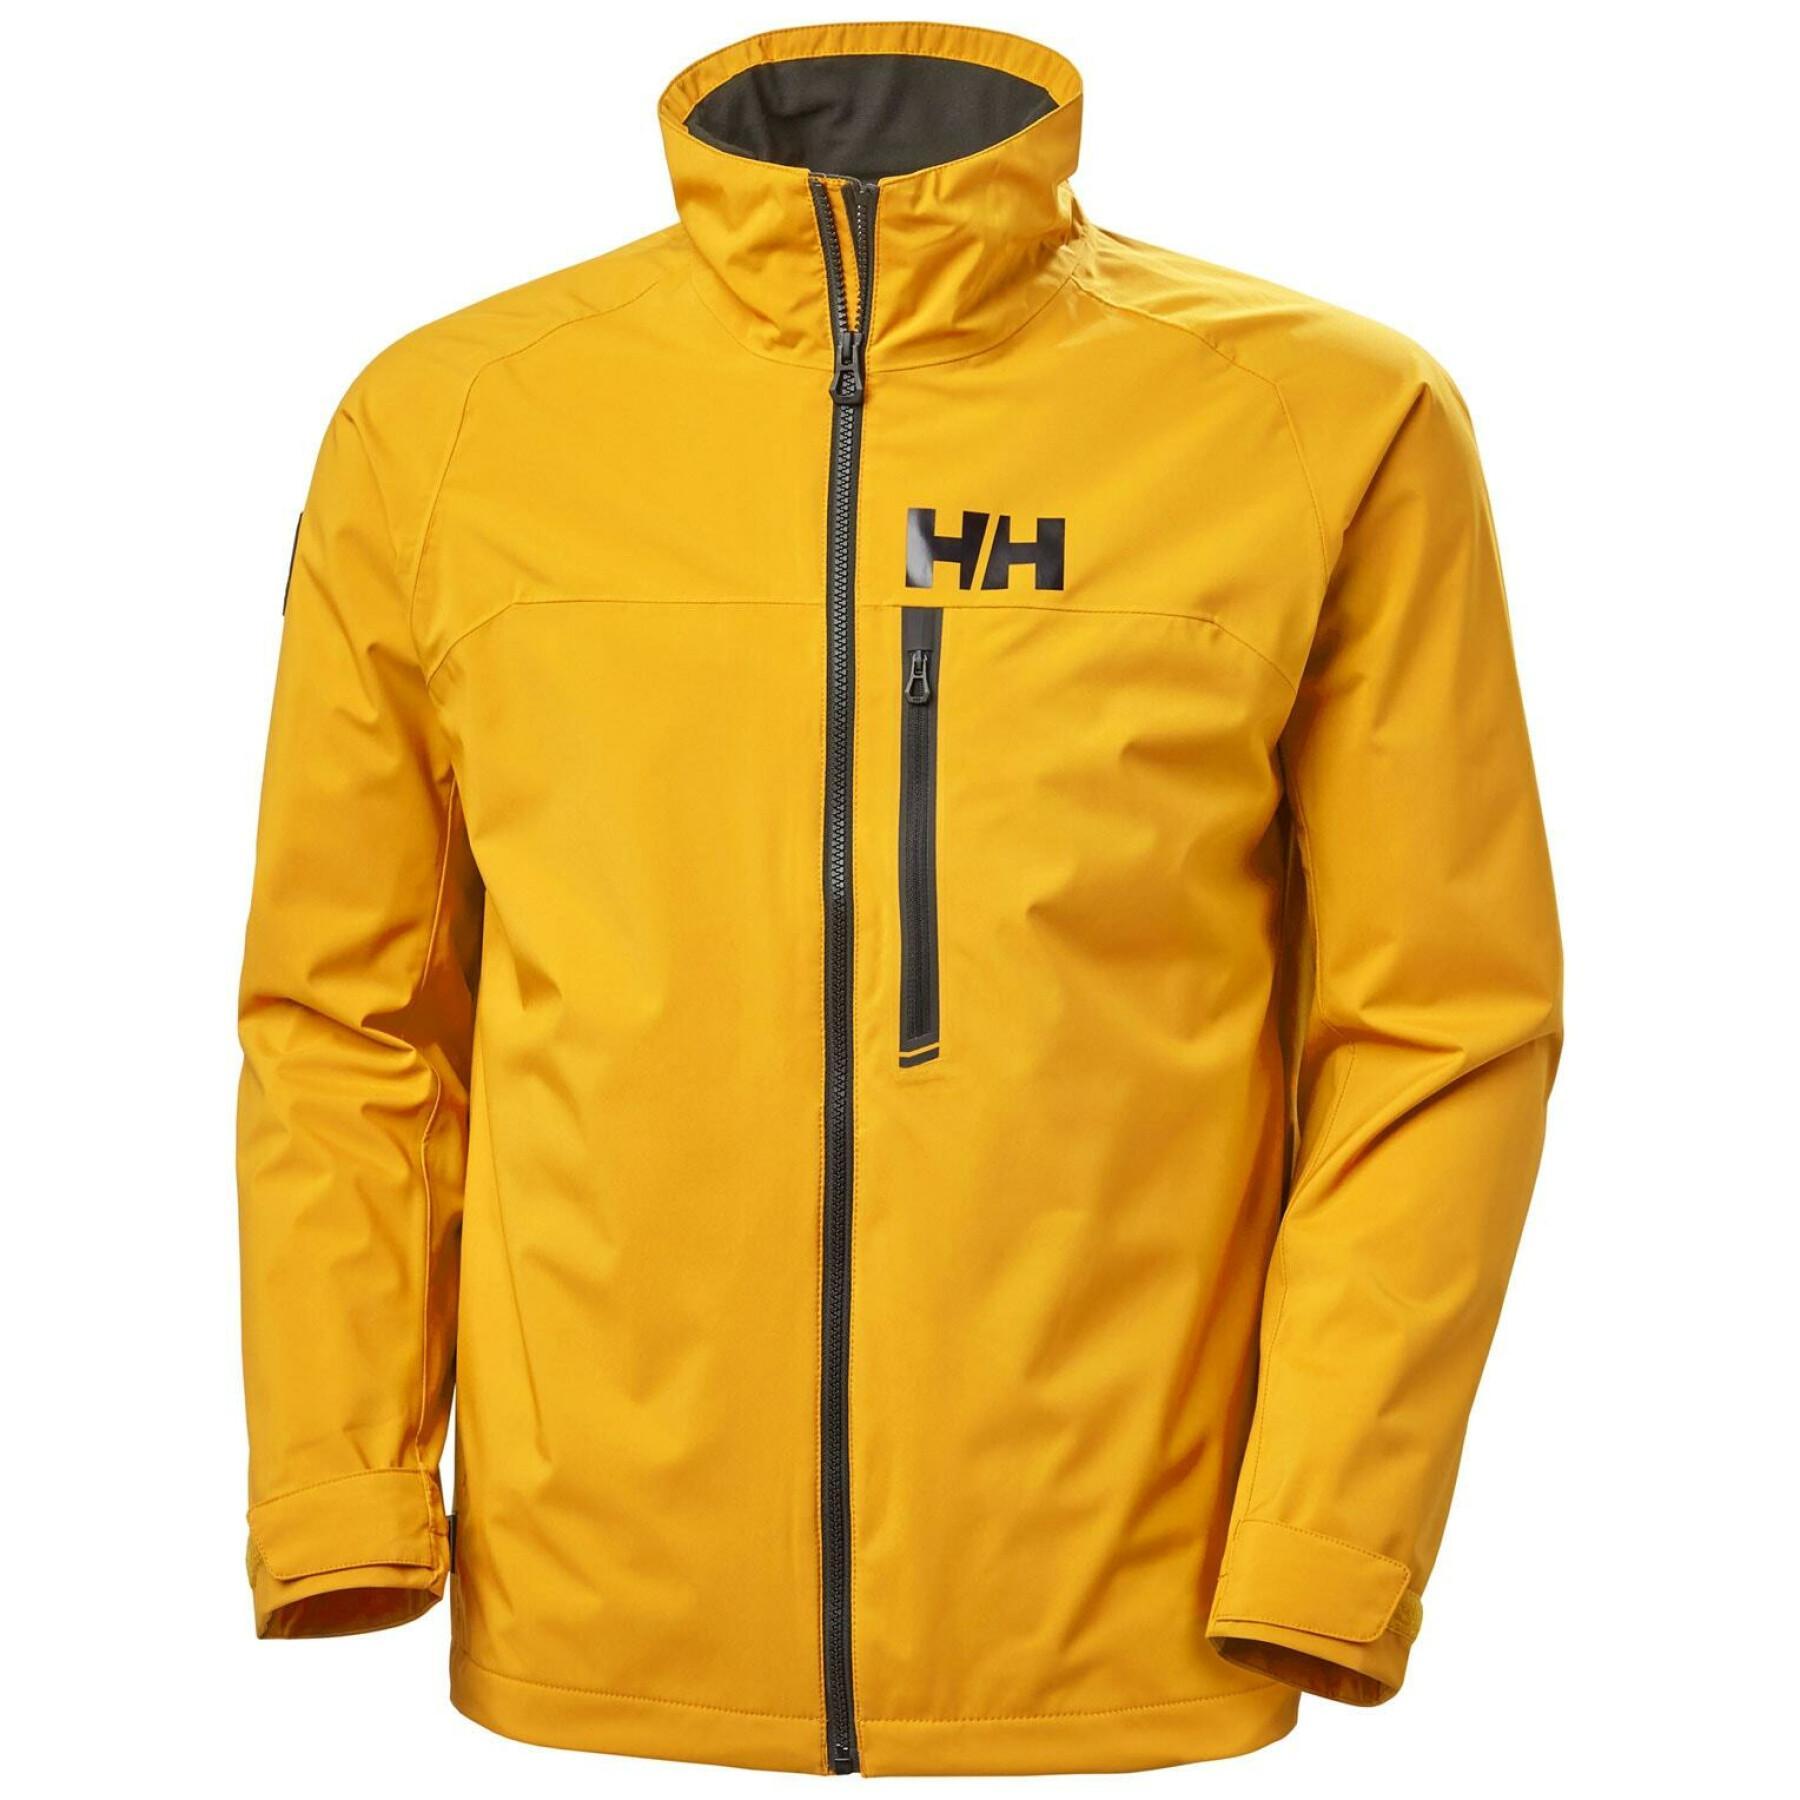 Giacca impermeabile Helly Hansen Hp Racing